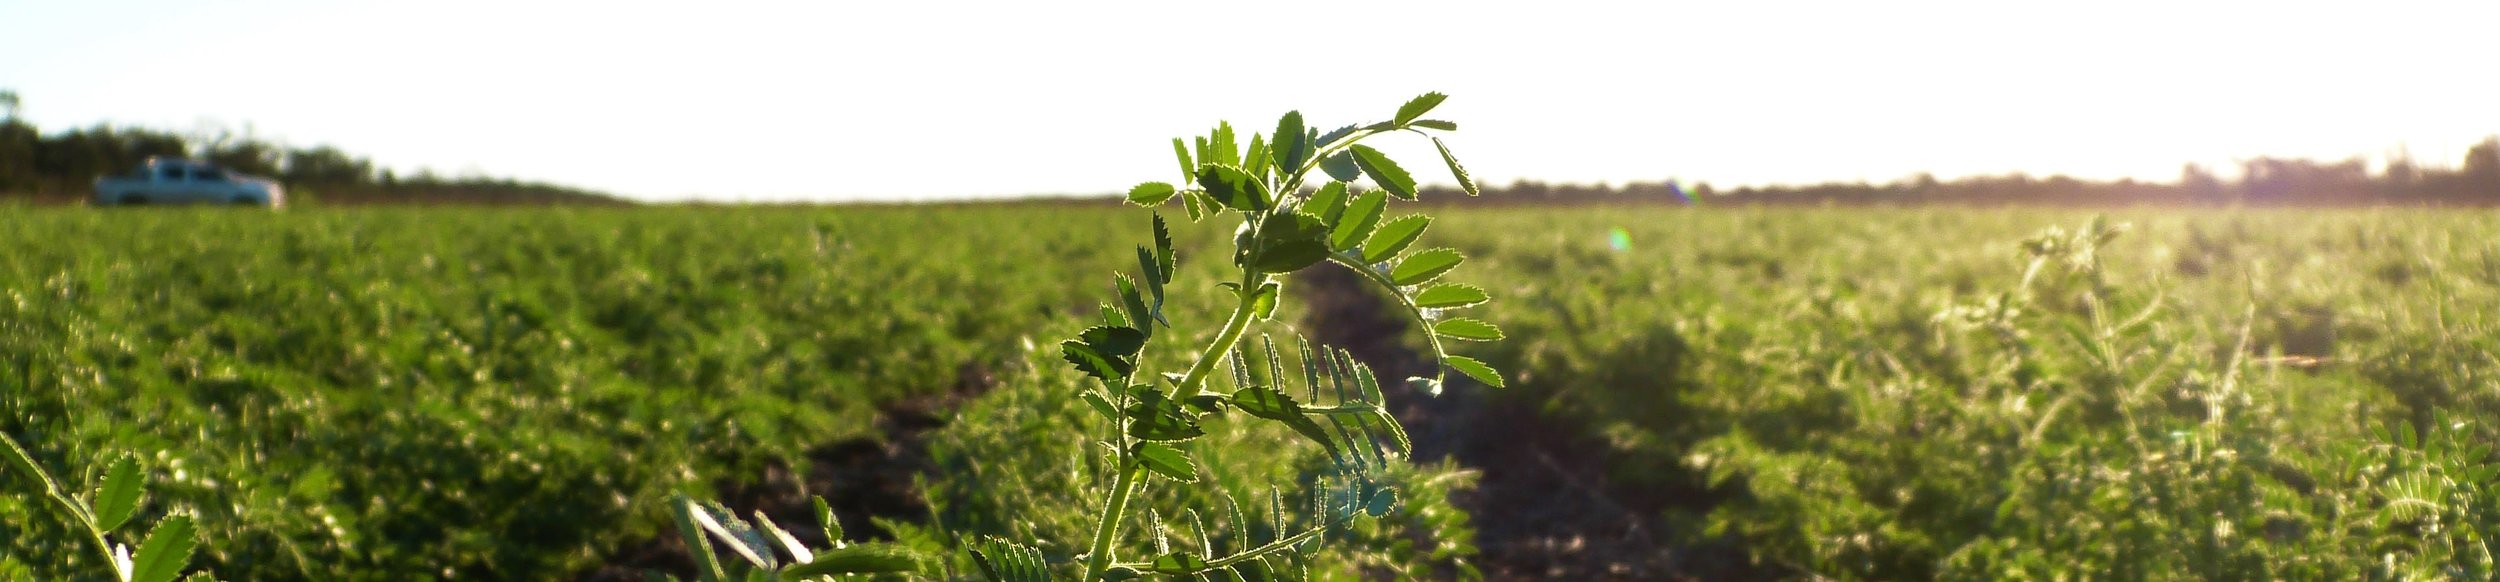 Chickpeas are one of the earliest cultivated legumes in the world.